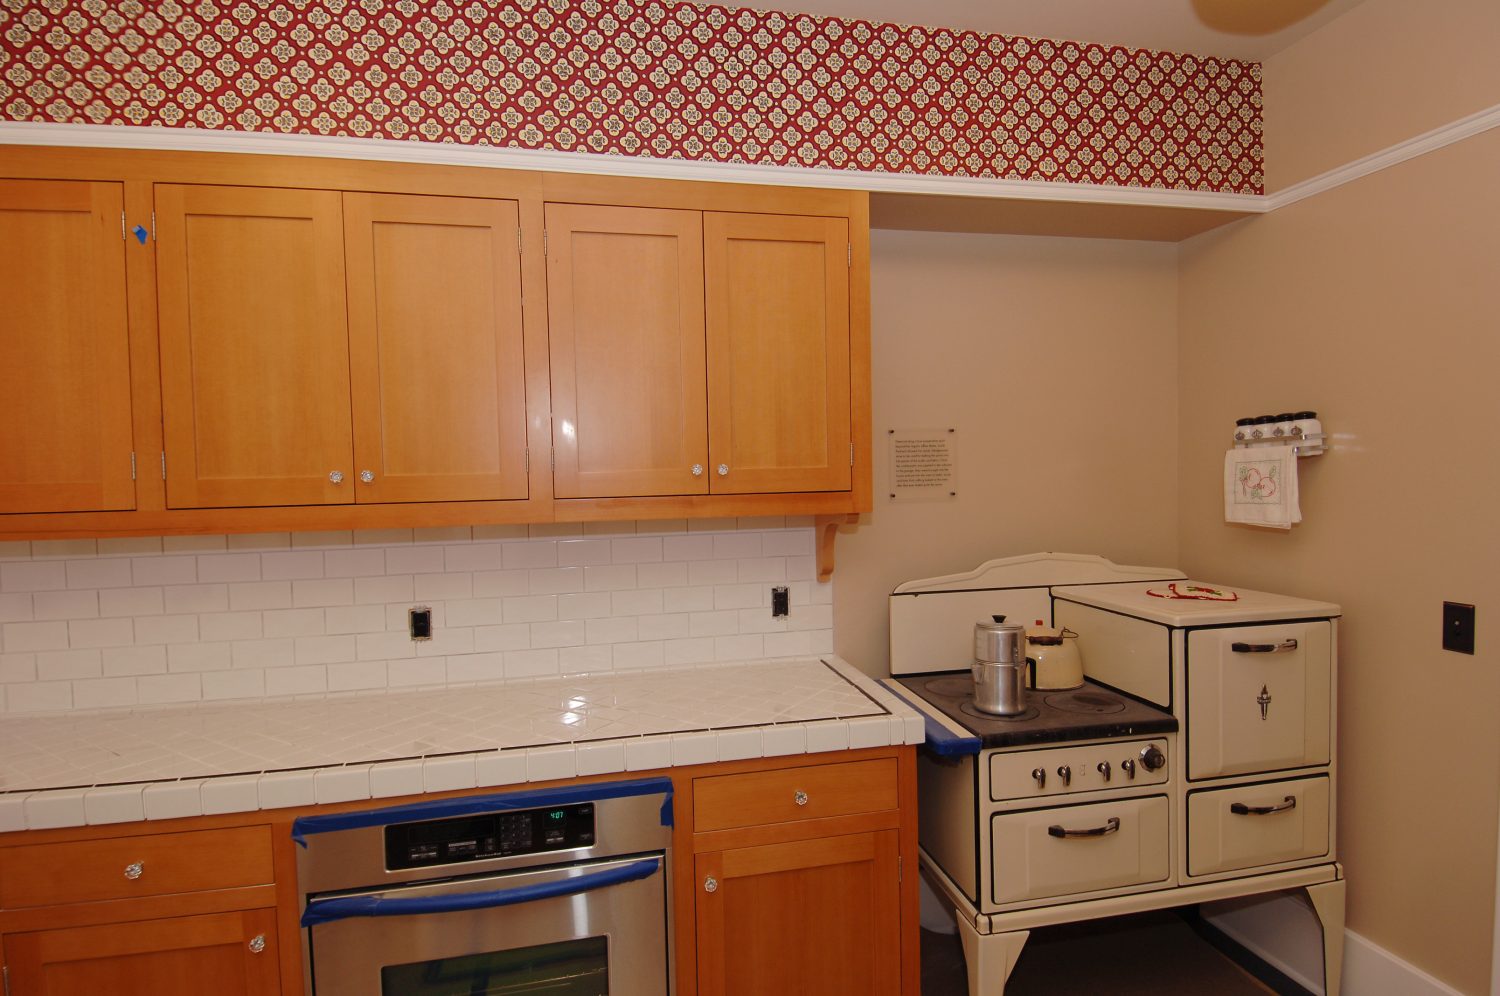 A photo of the Addison Avenue house kitchen after restoration.